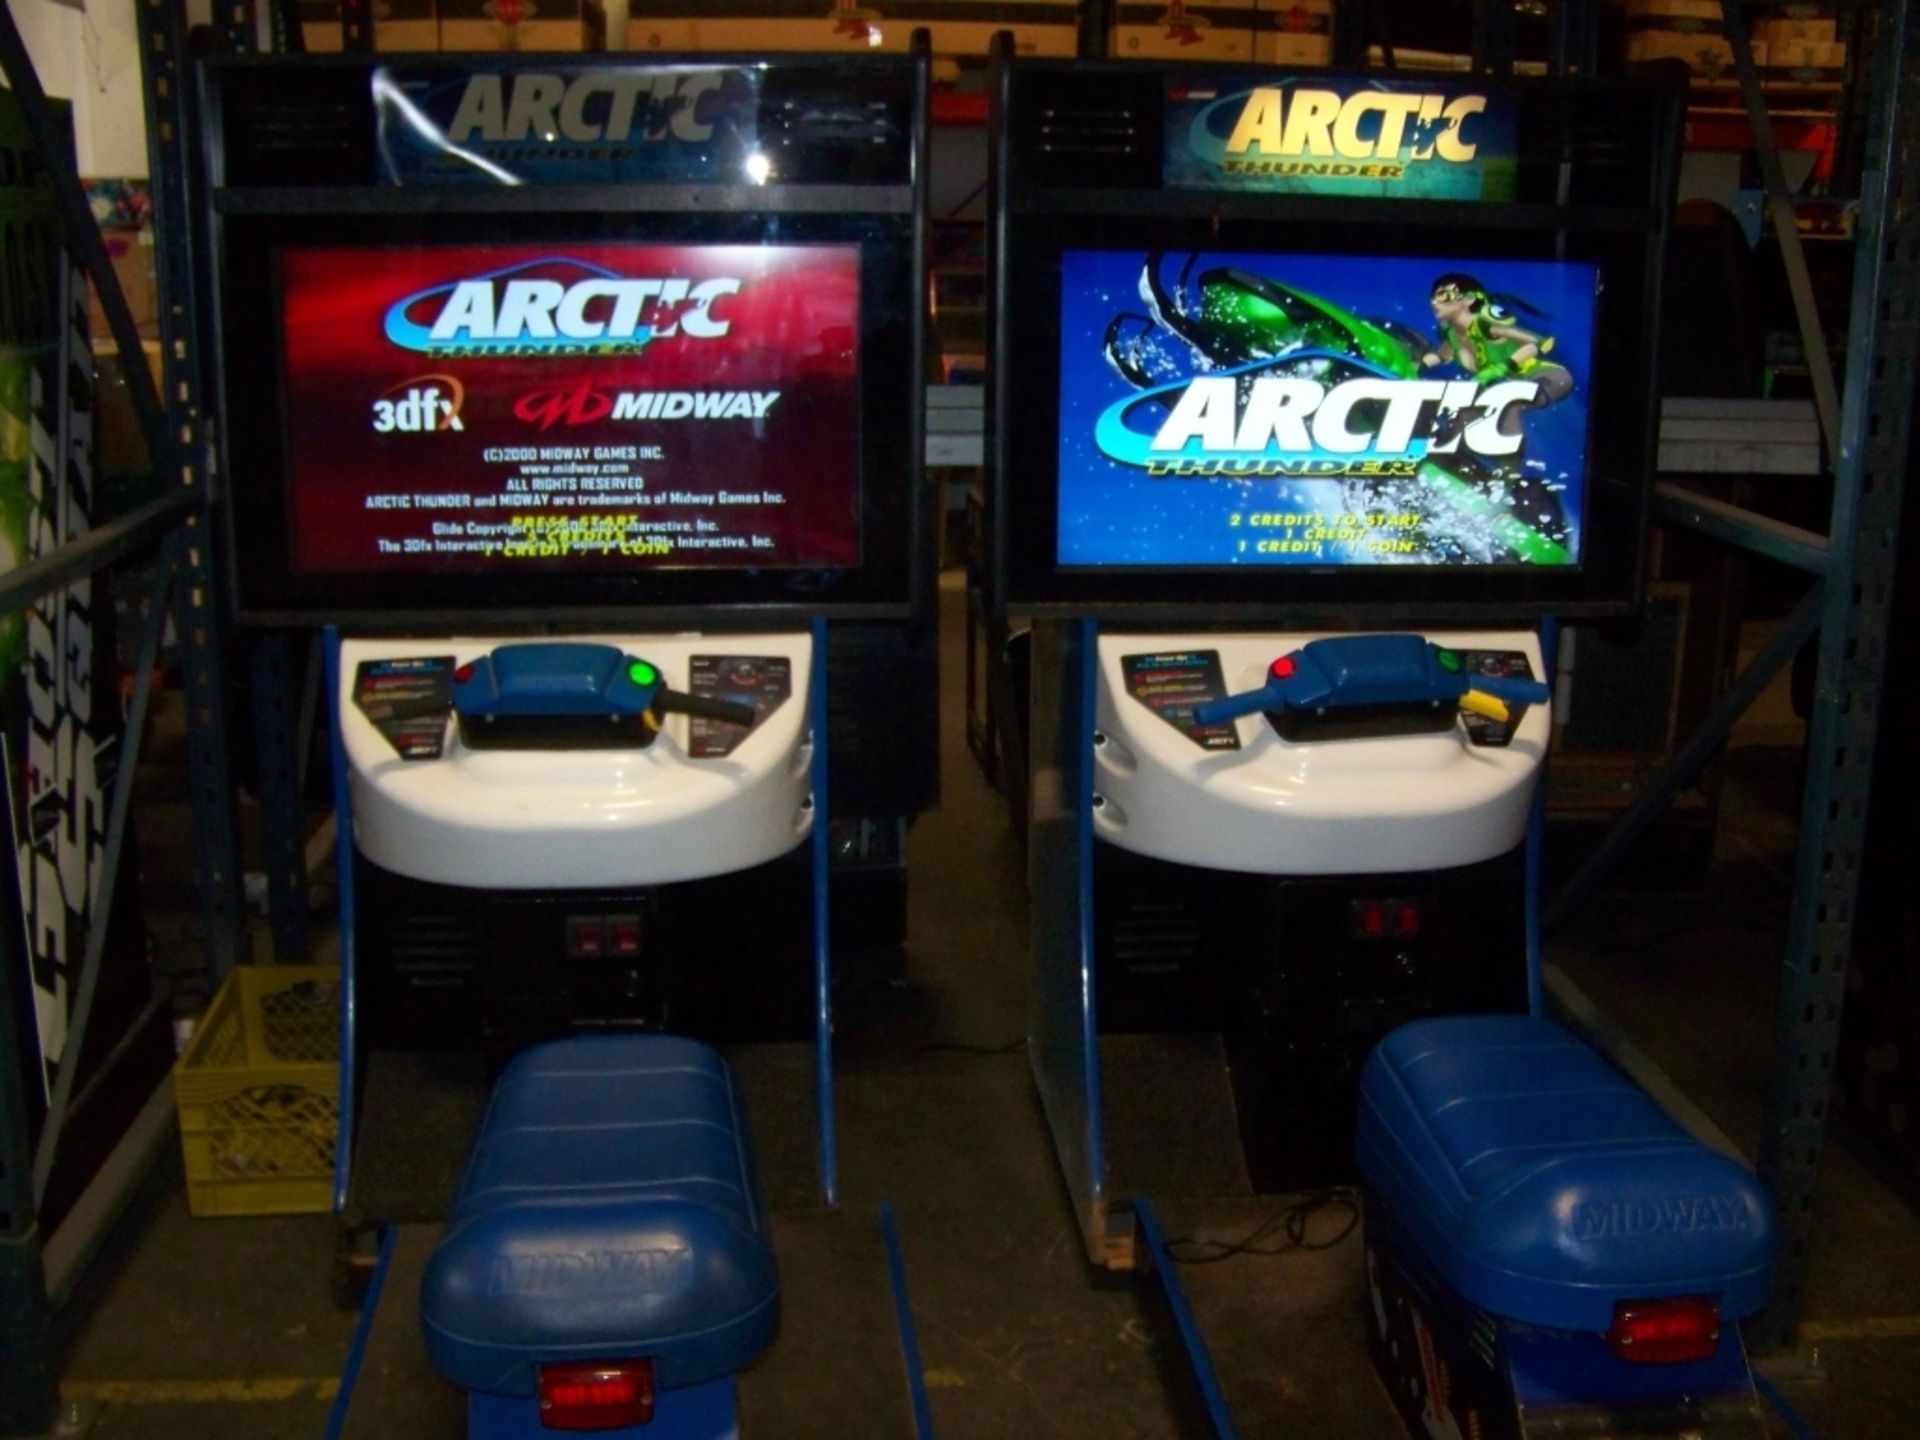 ARCTIC THUNDER DX LCD RACING ARCADE GAME - Image 3 of 4